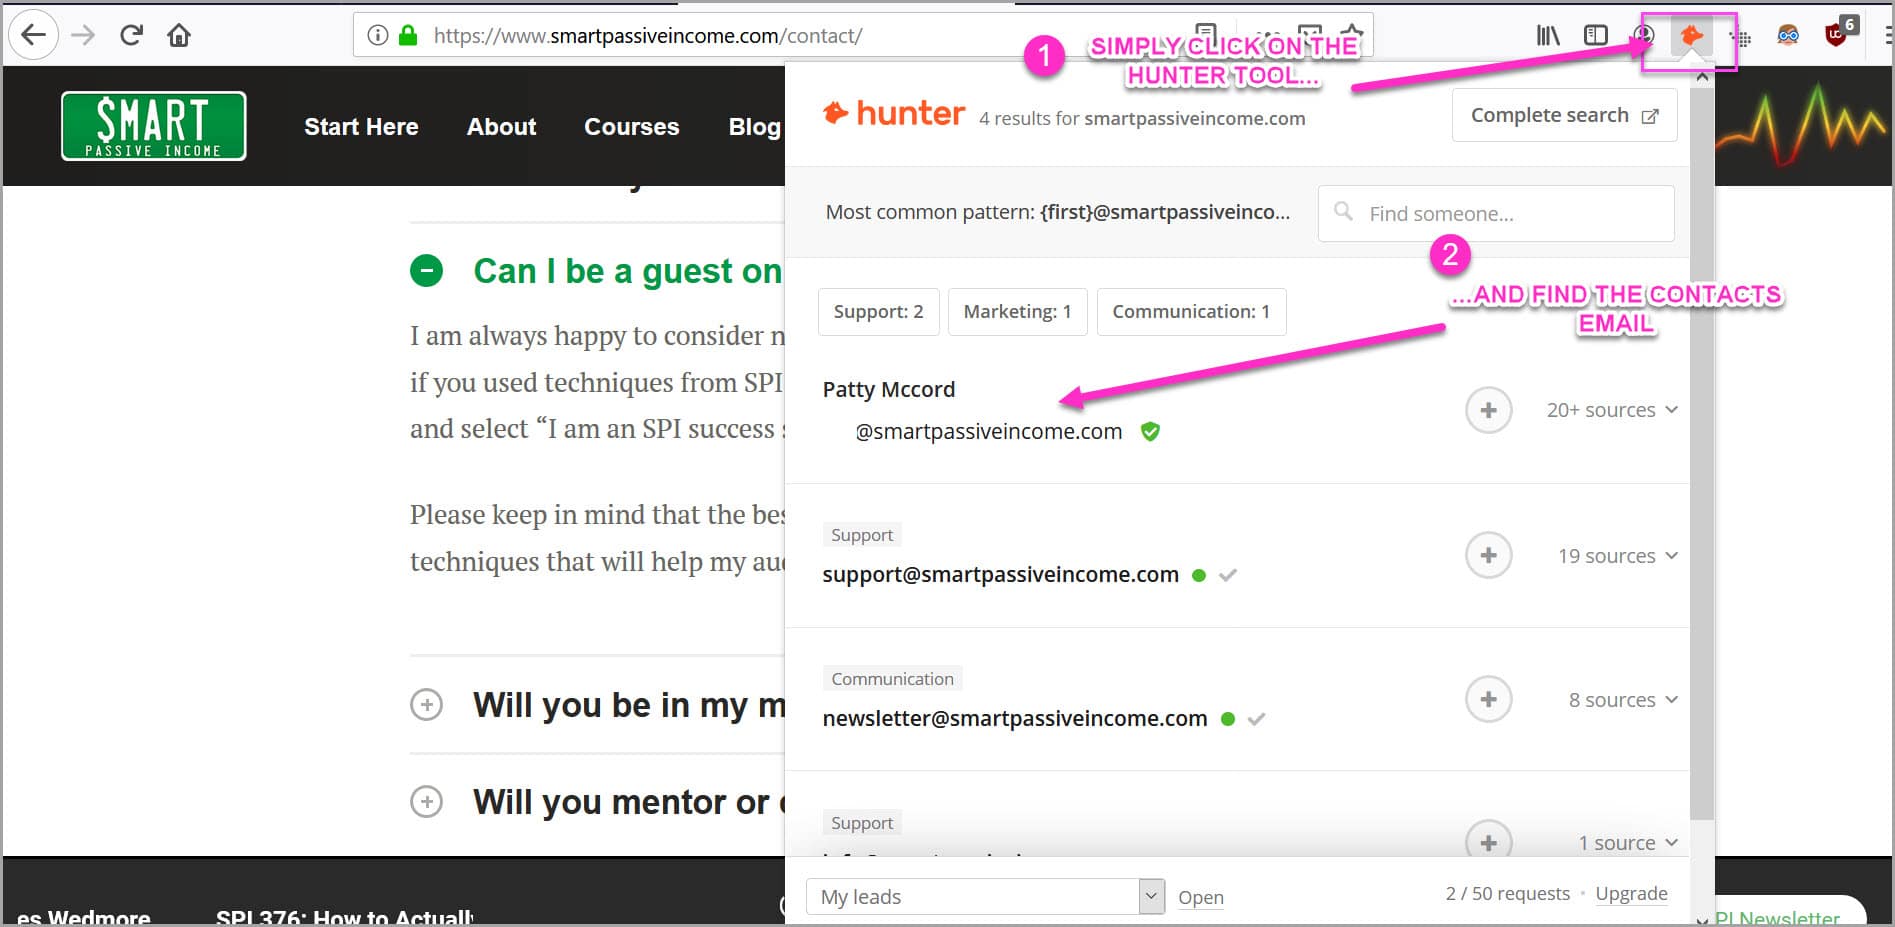 Find the podcast hosts email so that you can pitch them on being a guest